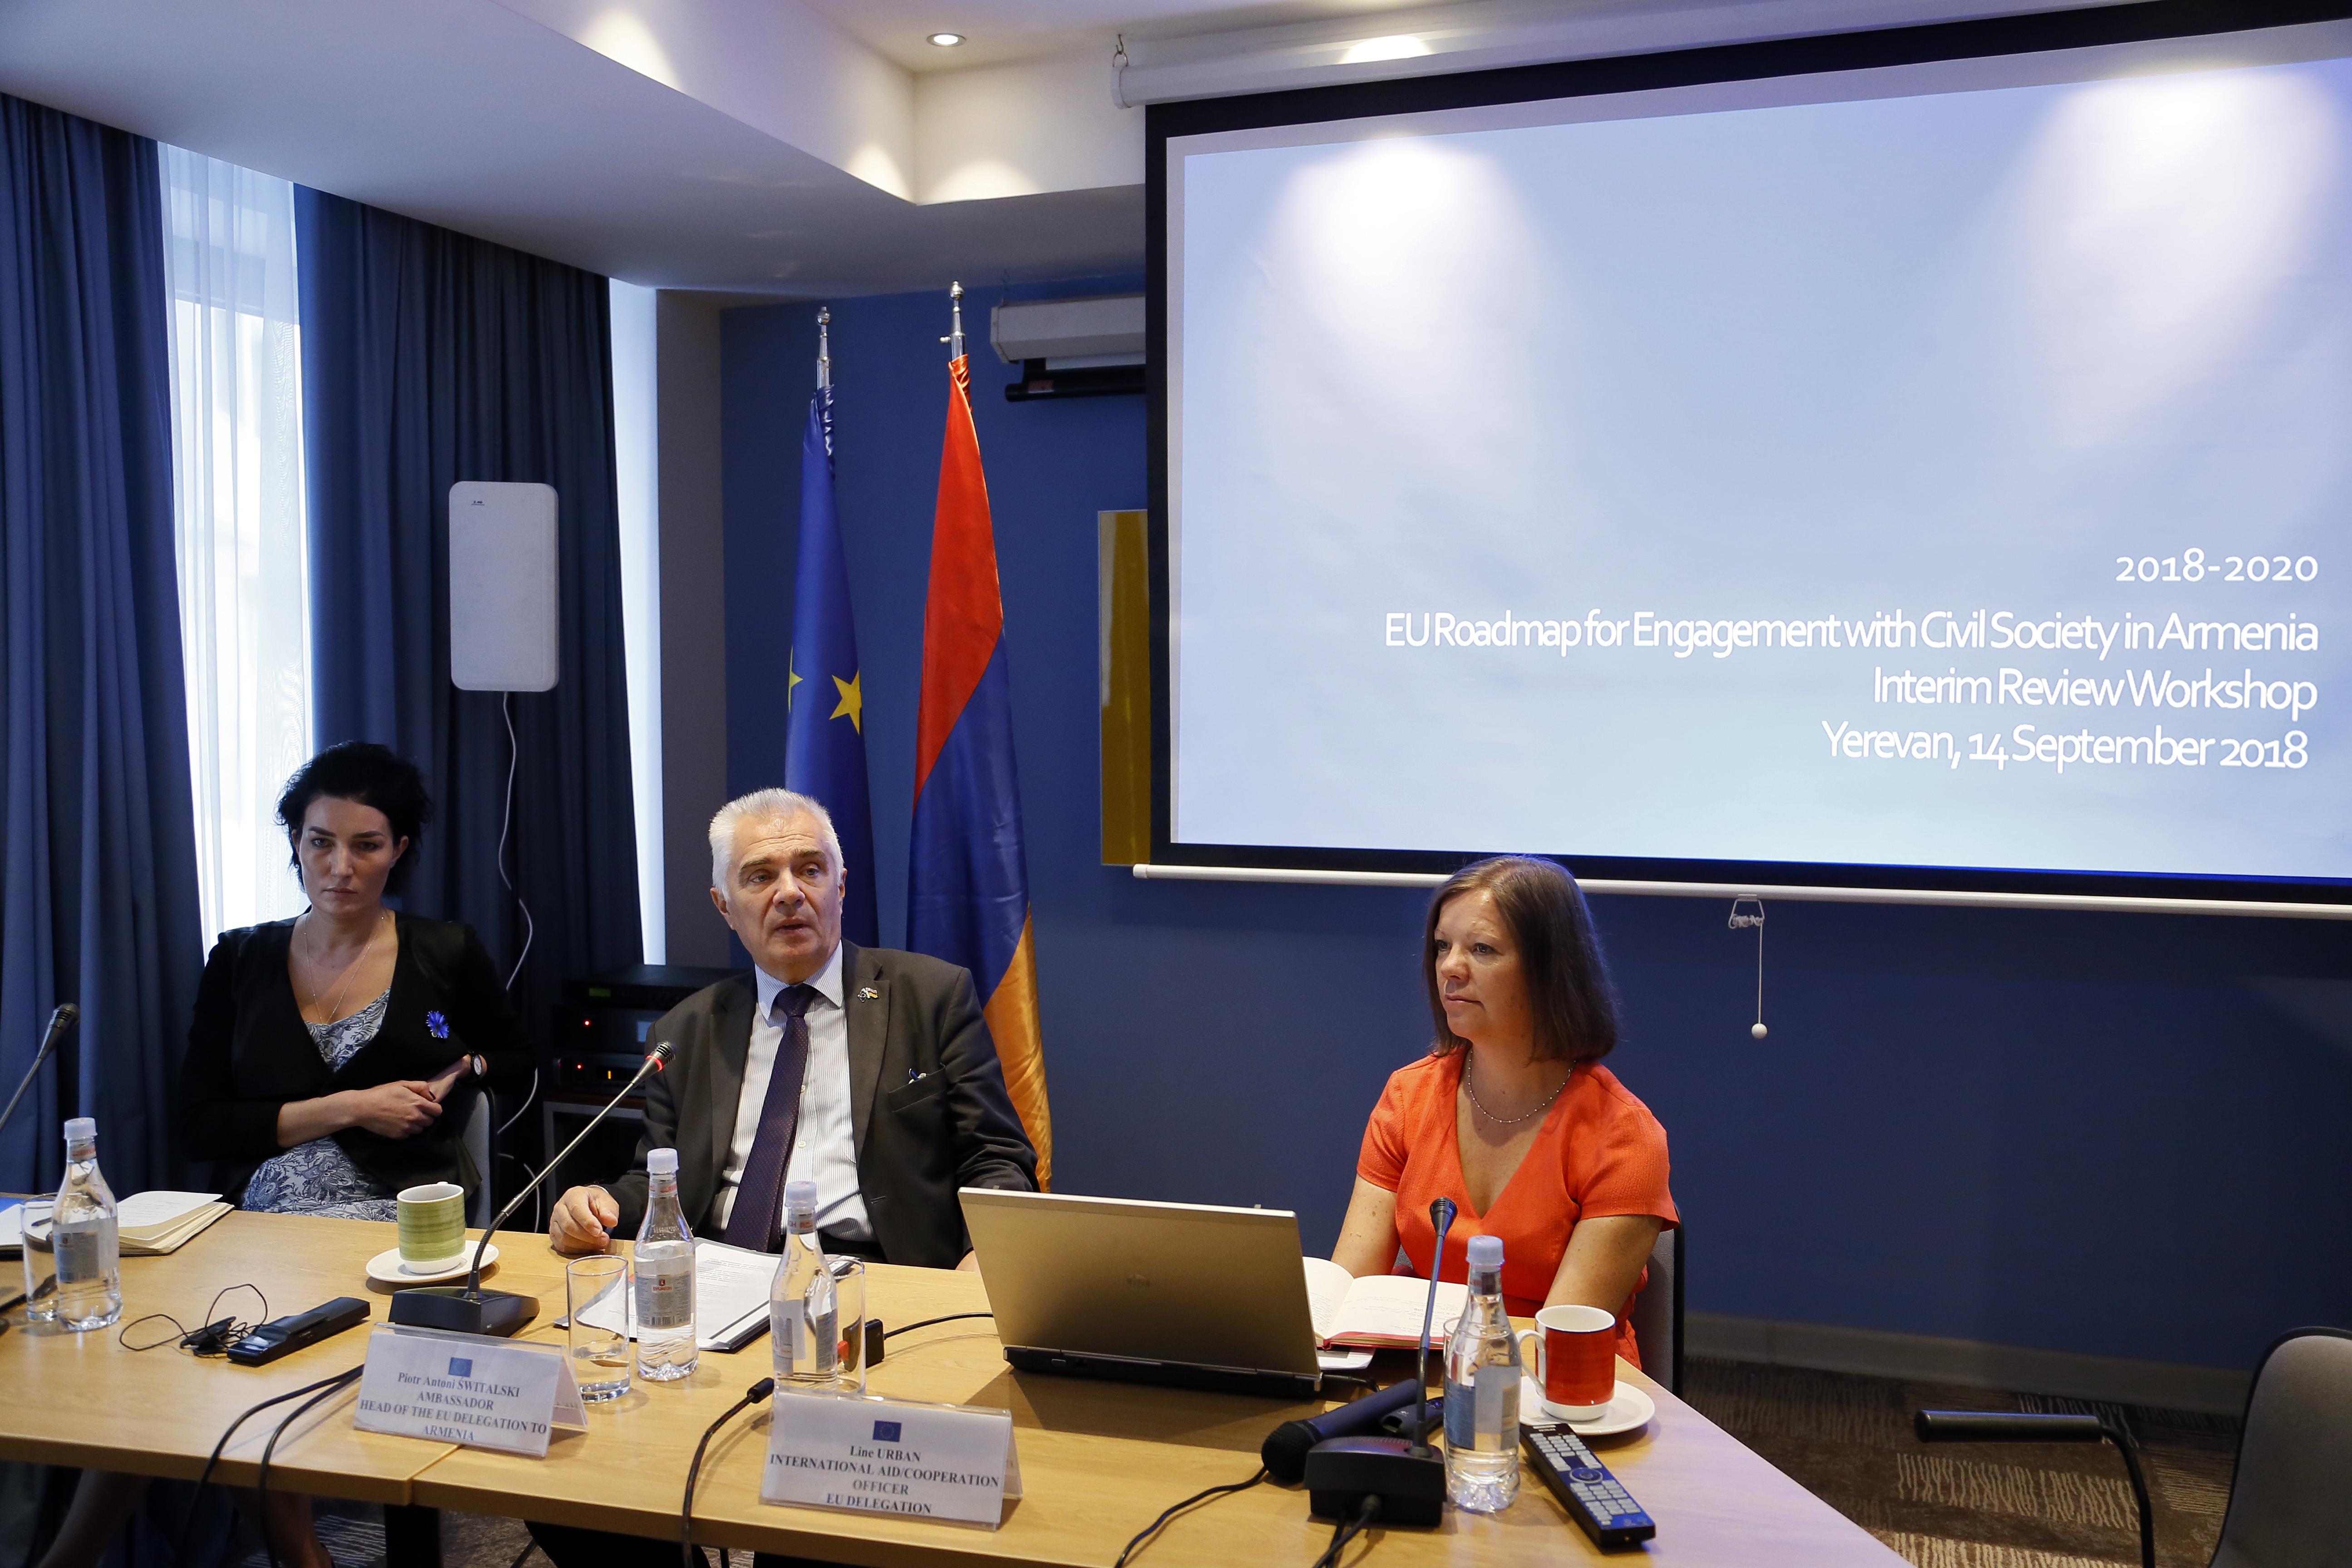 Consultations on the new Roadmap for Engagement with Civil Society in Armenia